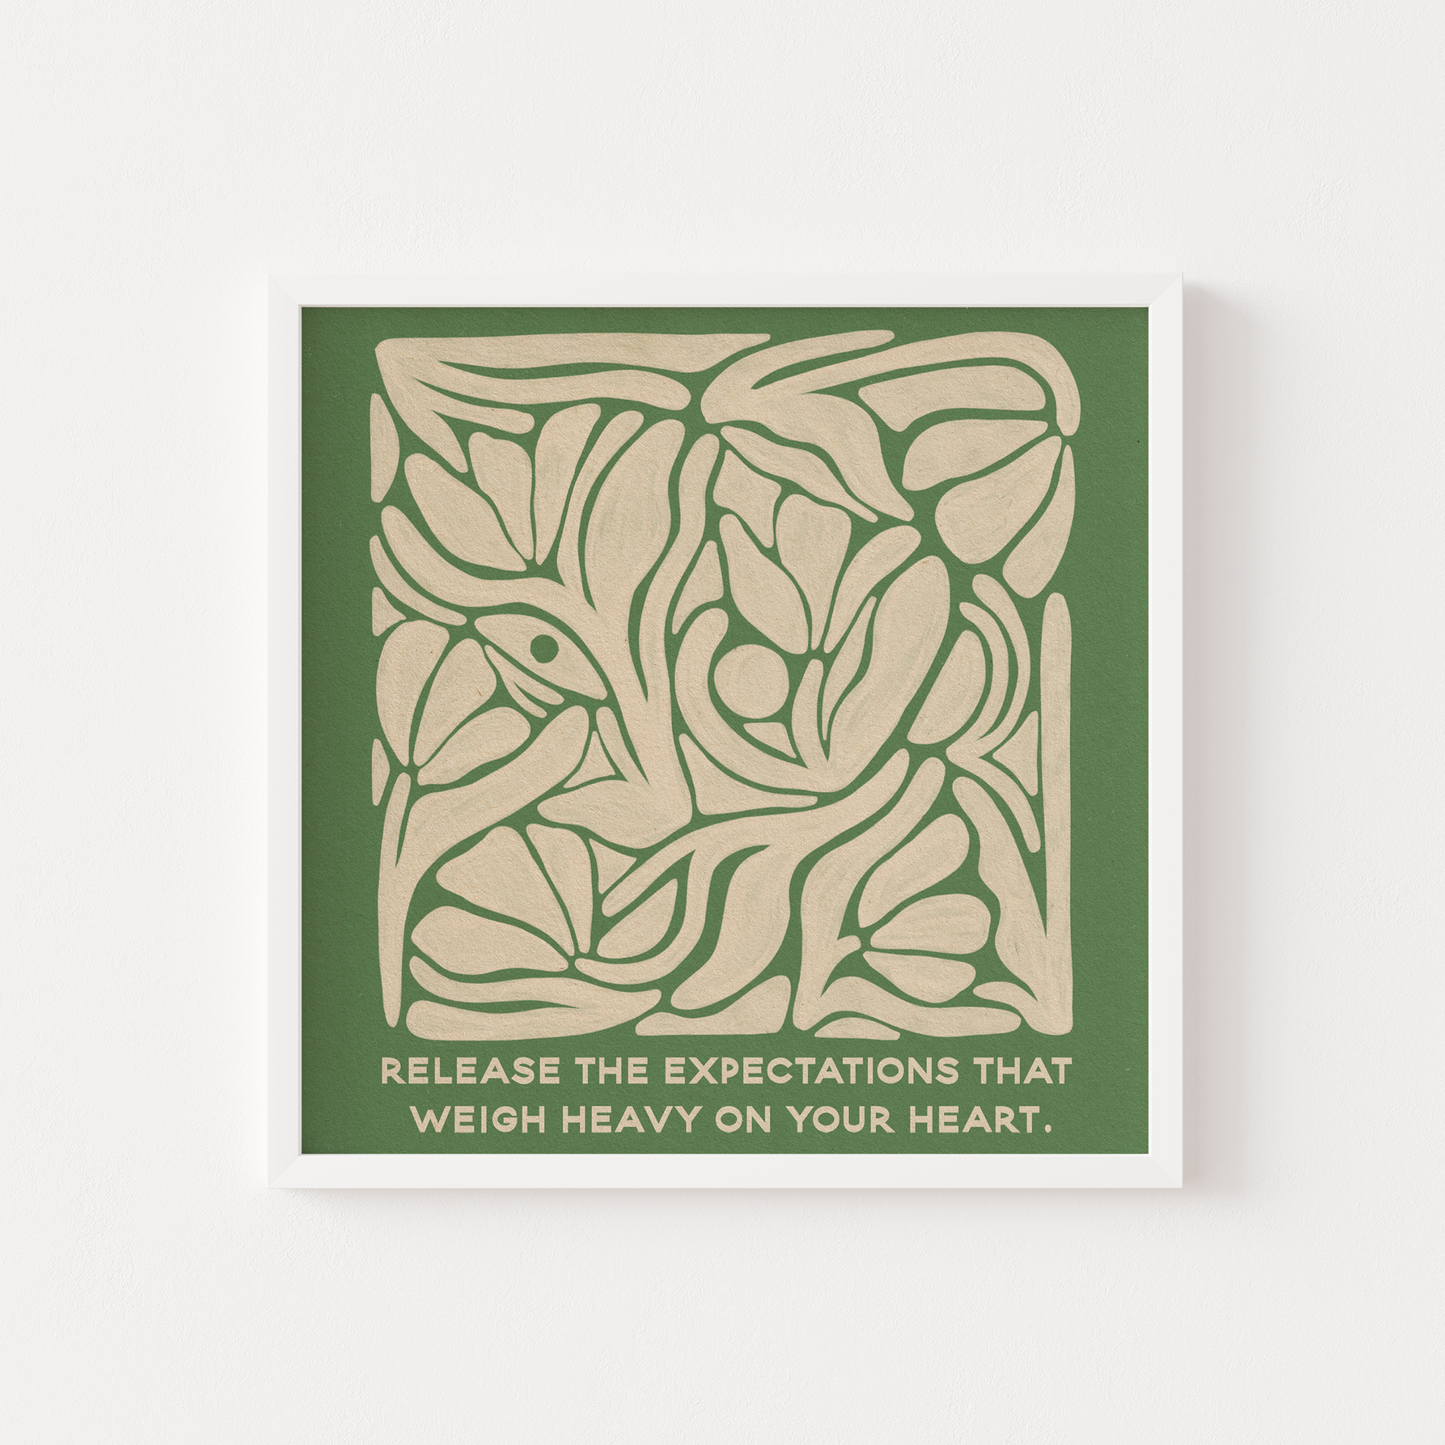 The SoulShine Co. - Release Heavy Expectations - Print: 8x8 / Blue / Words